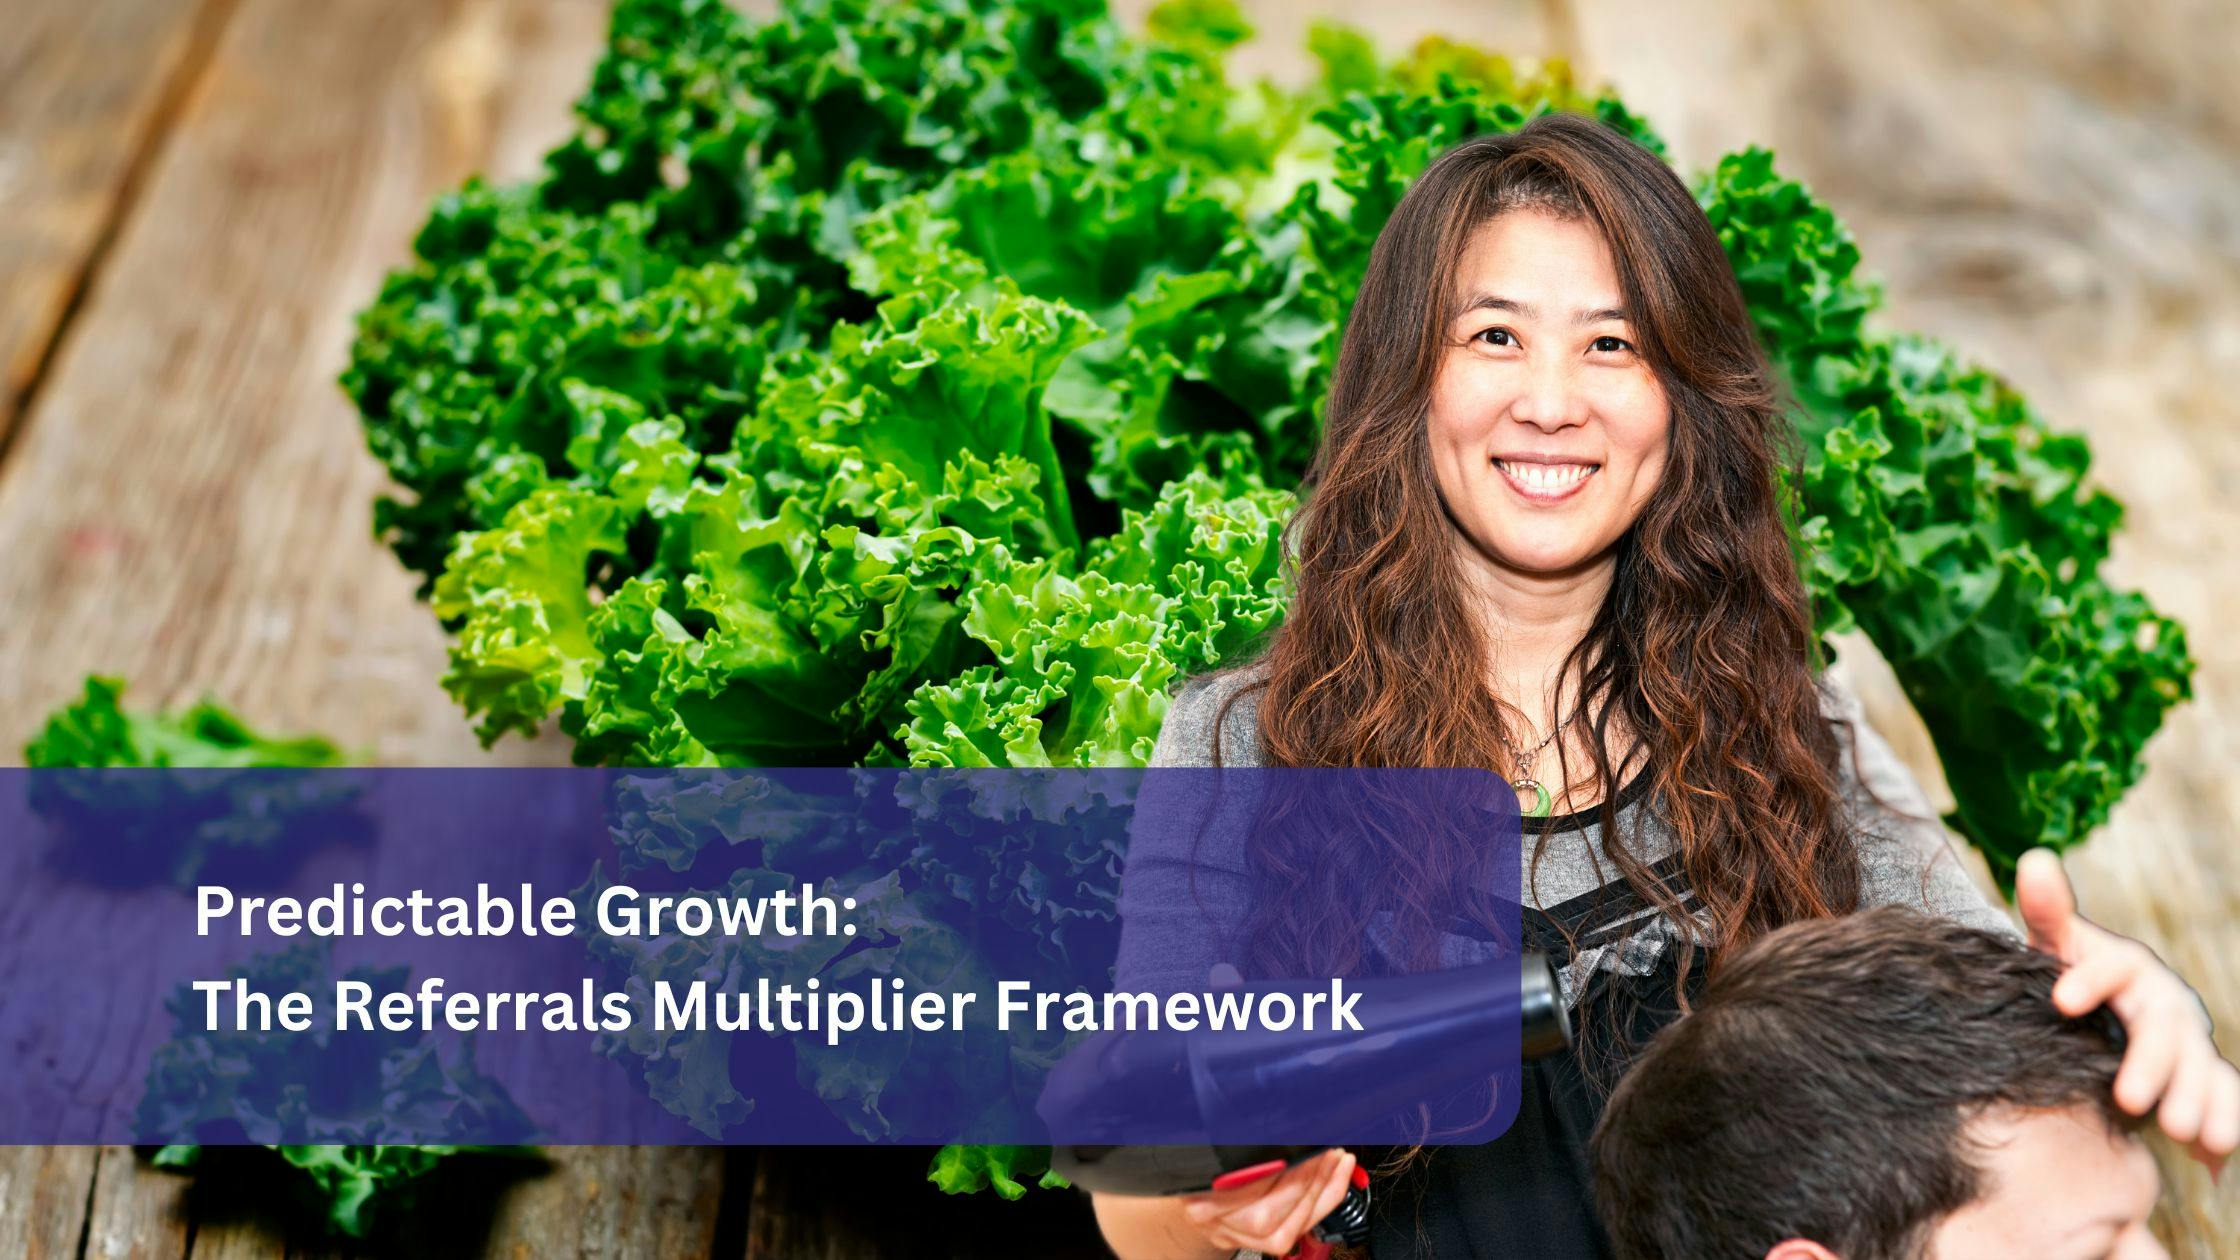 Predictable Growth: The Referrals Multiplier Framework